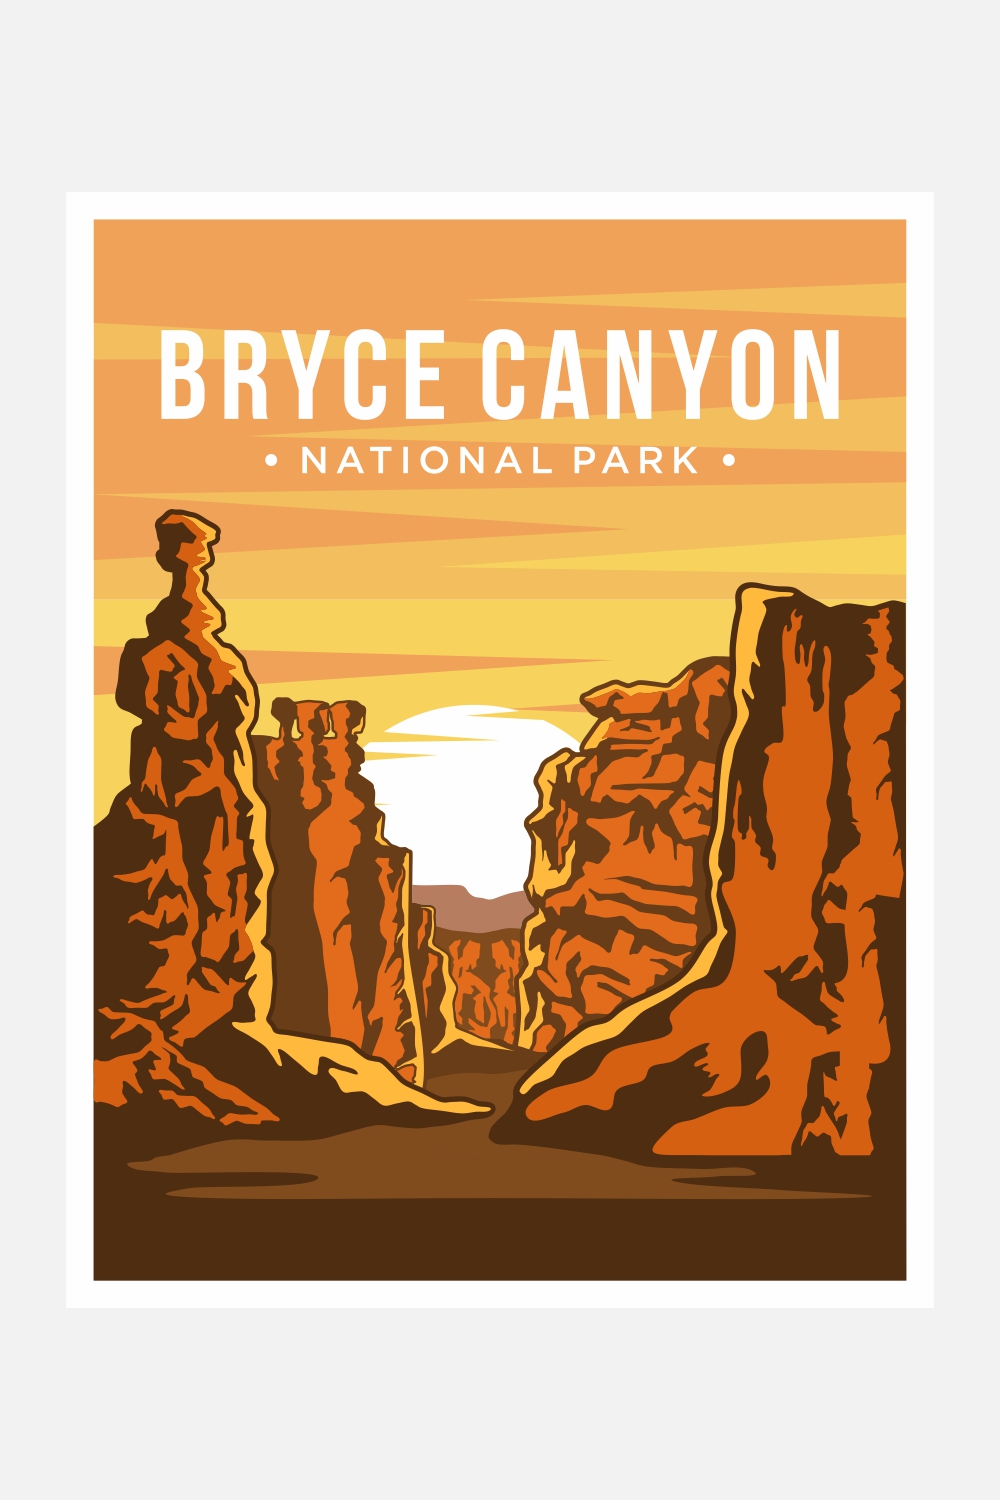 Bryce Canyon National Park Poster Vector Illustration - only $10 pinterest preview image.